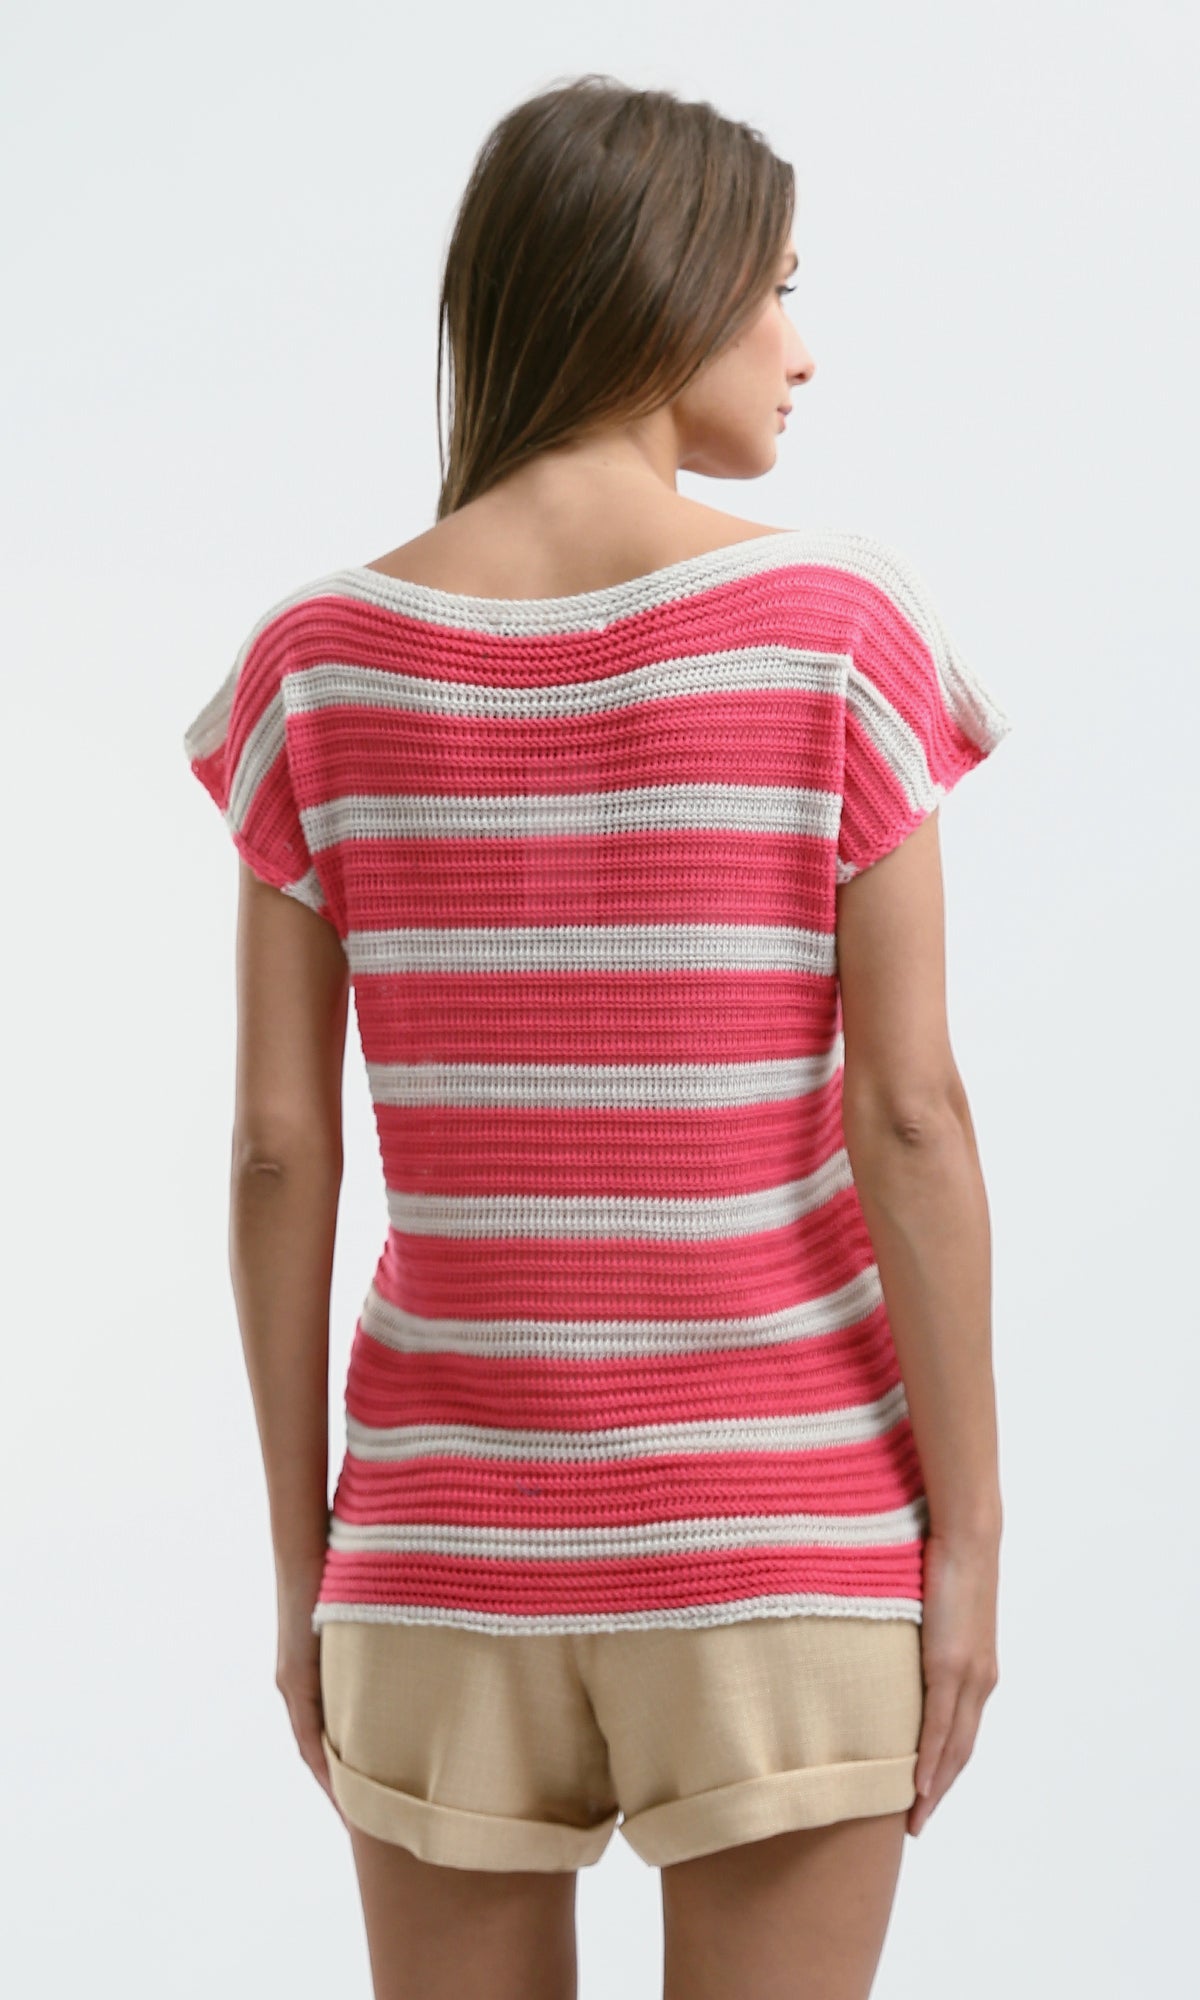 O182710 Trendy Striped Slip On Summer Top - Pink & White